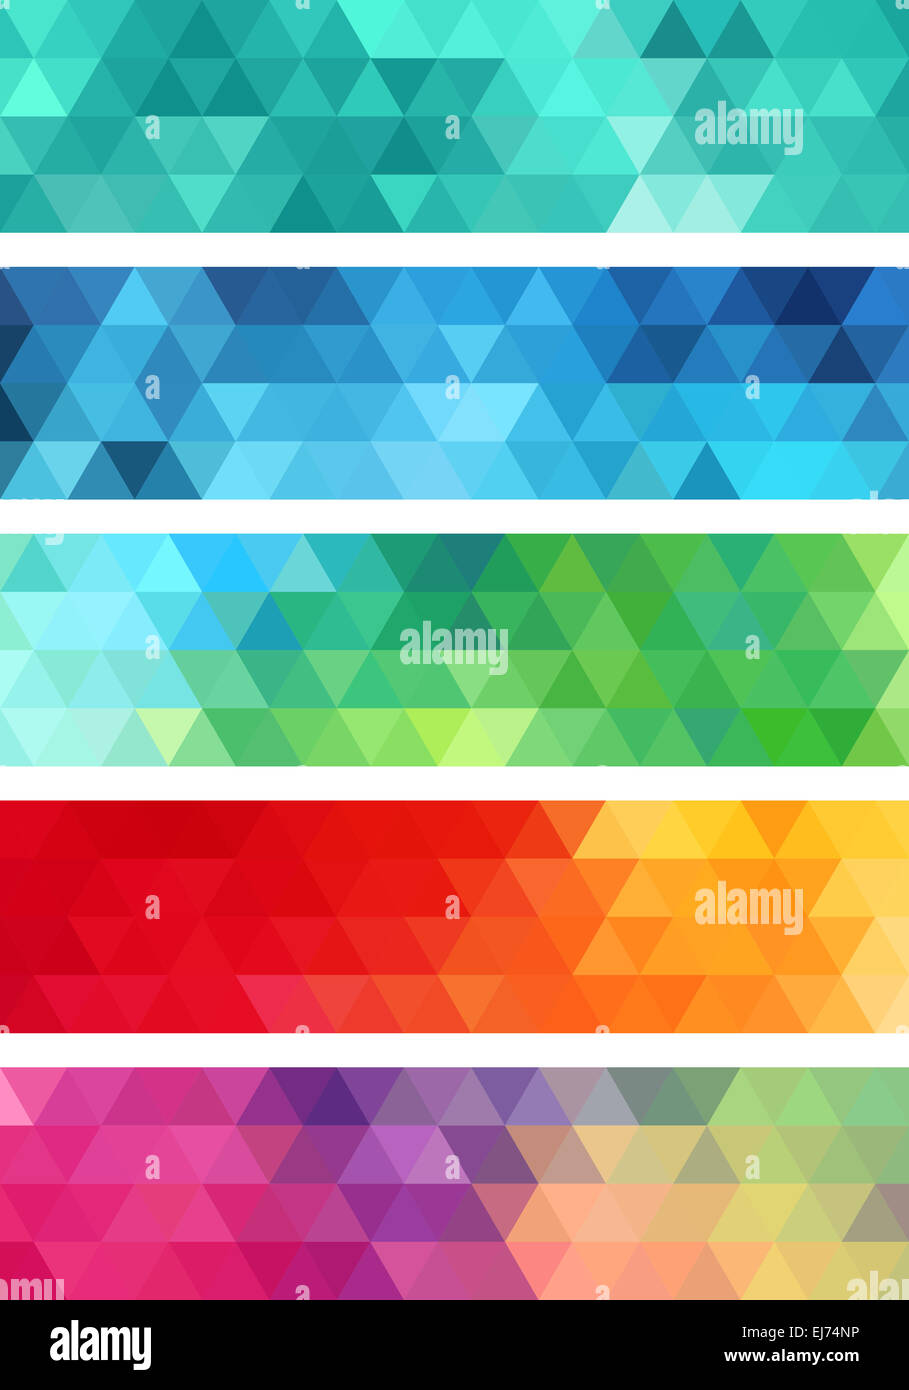 abstract geometric banner set Stock Photo